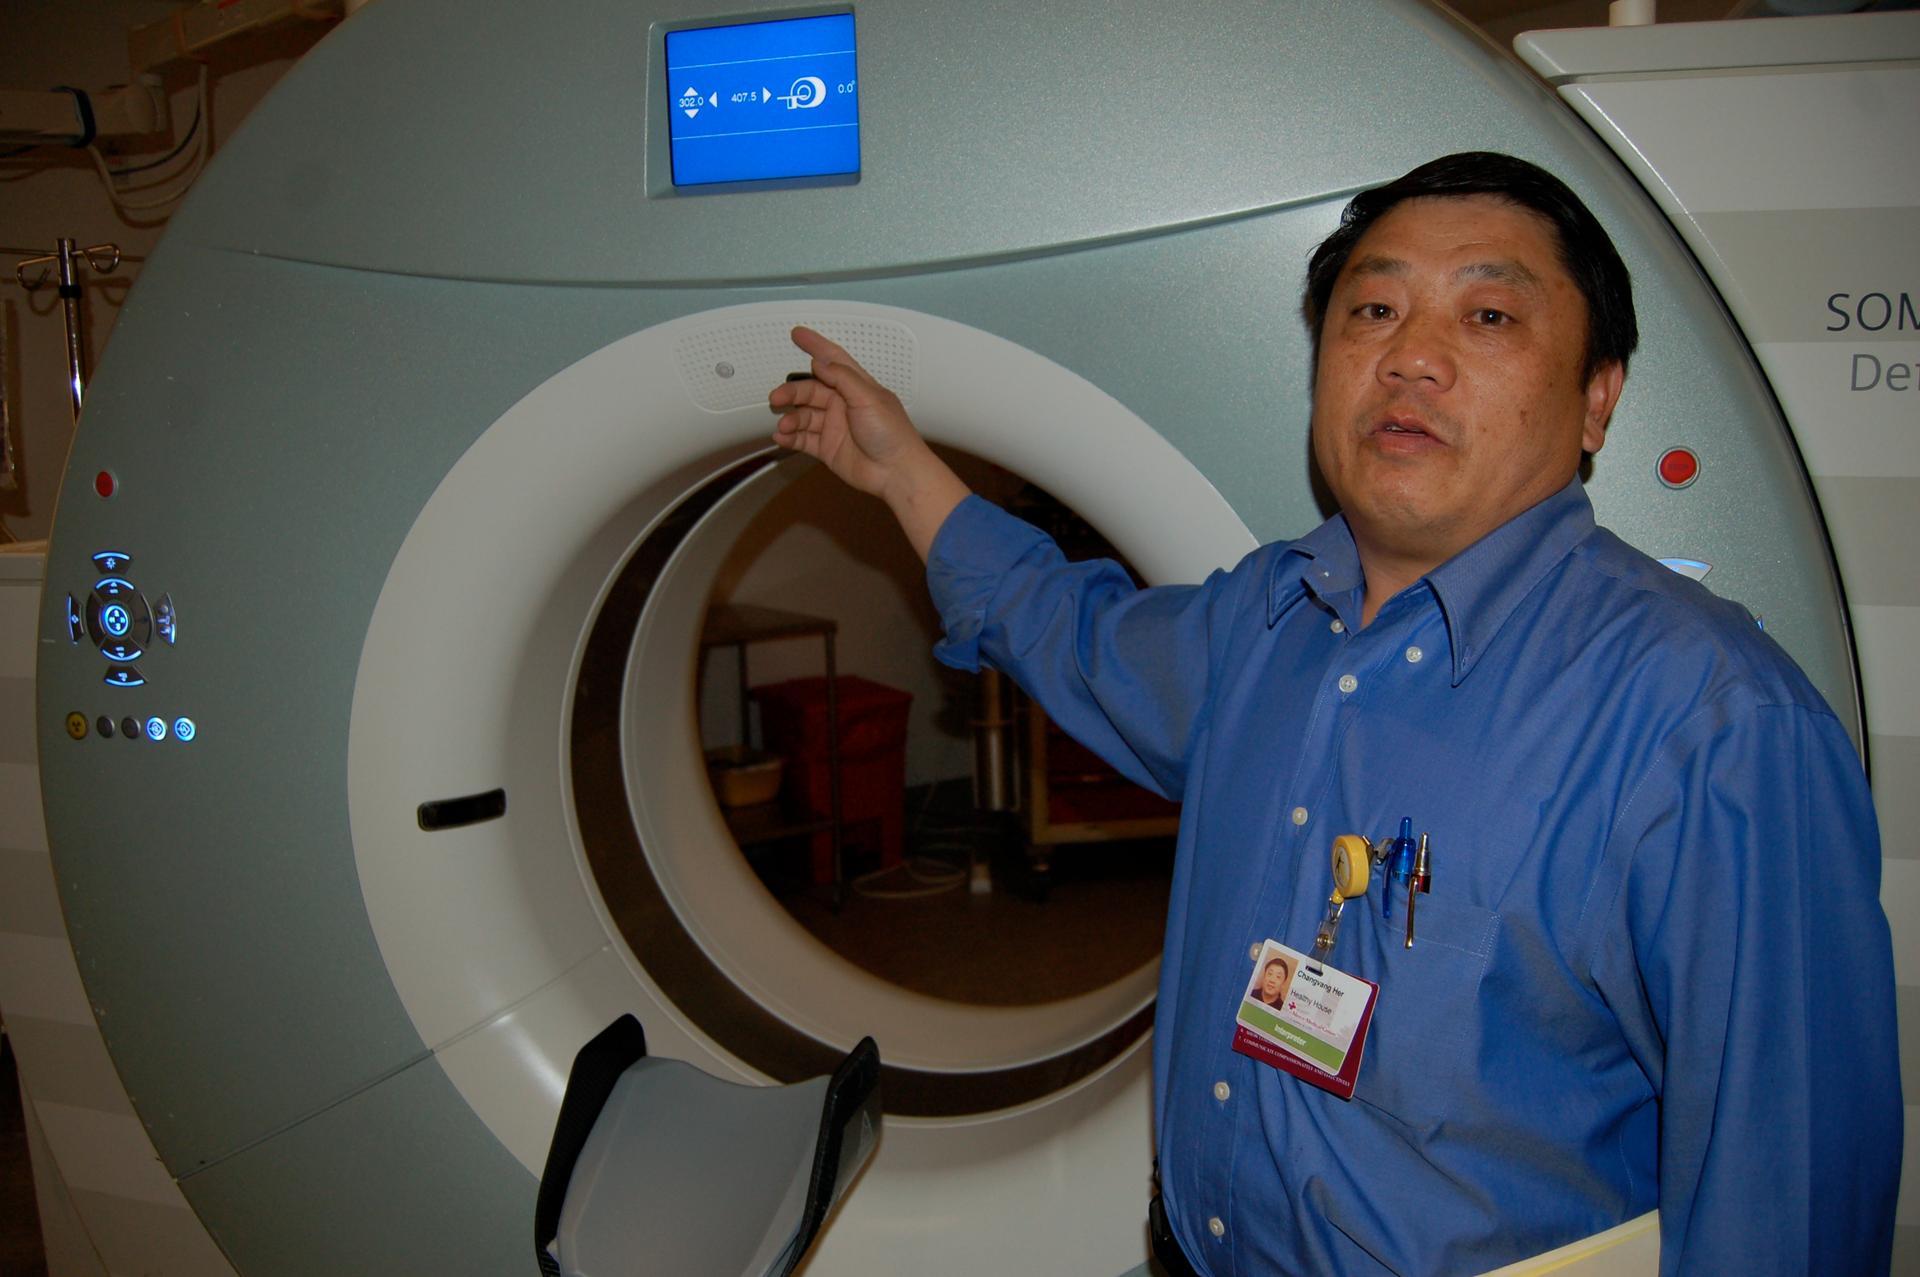 Changvang Her demonstrates how a CAT Scan machine at Mercy Medical Center plays an automated recording of his voice giving directions in Hmong — for when he's not around to translate.